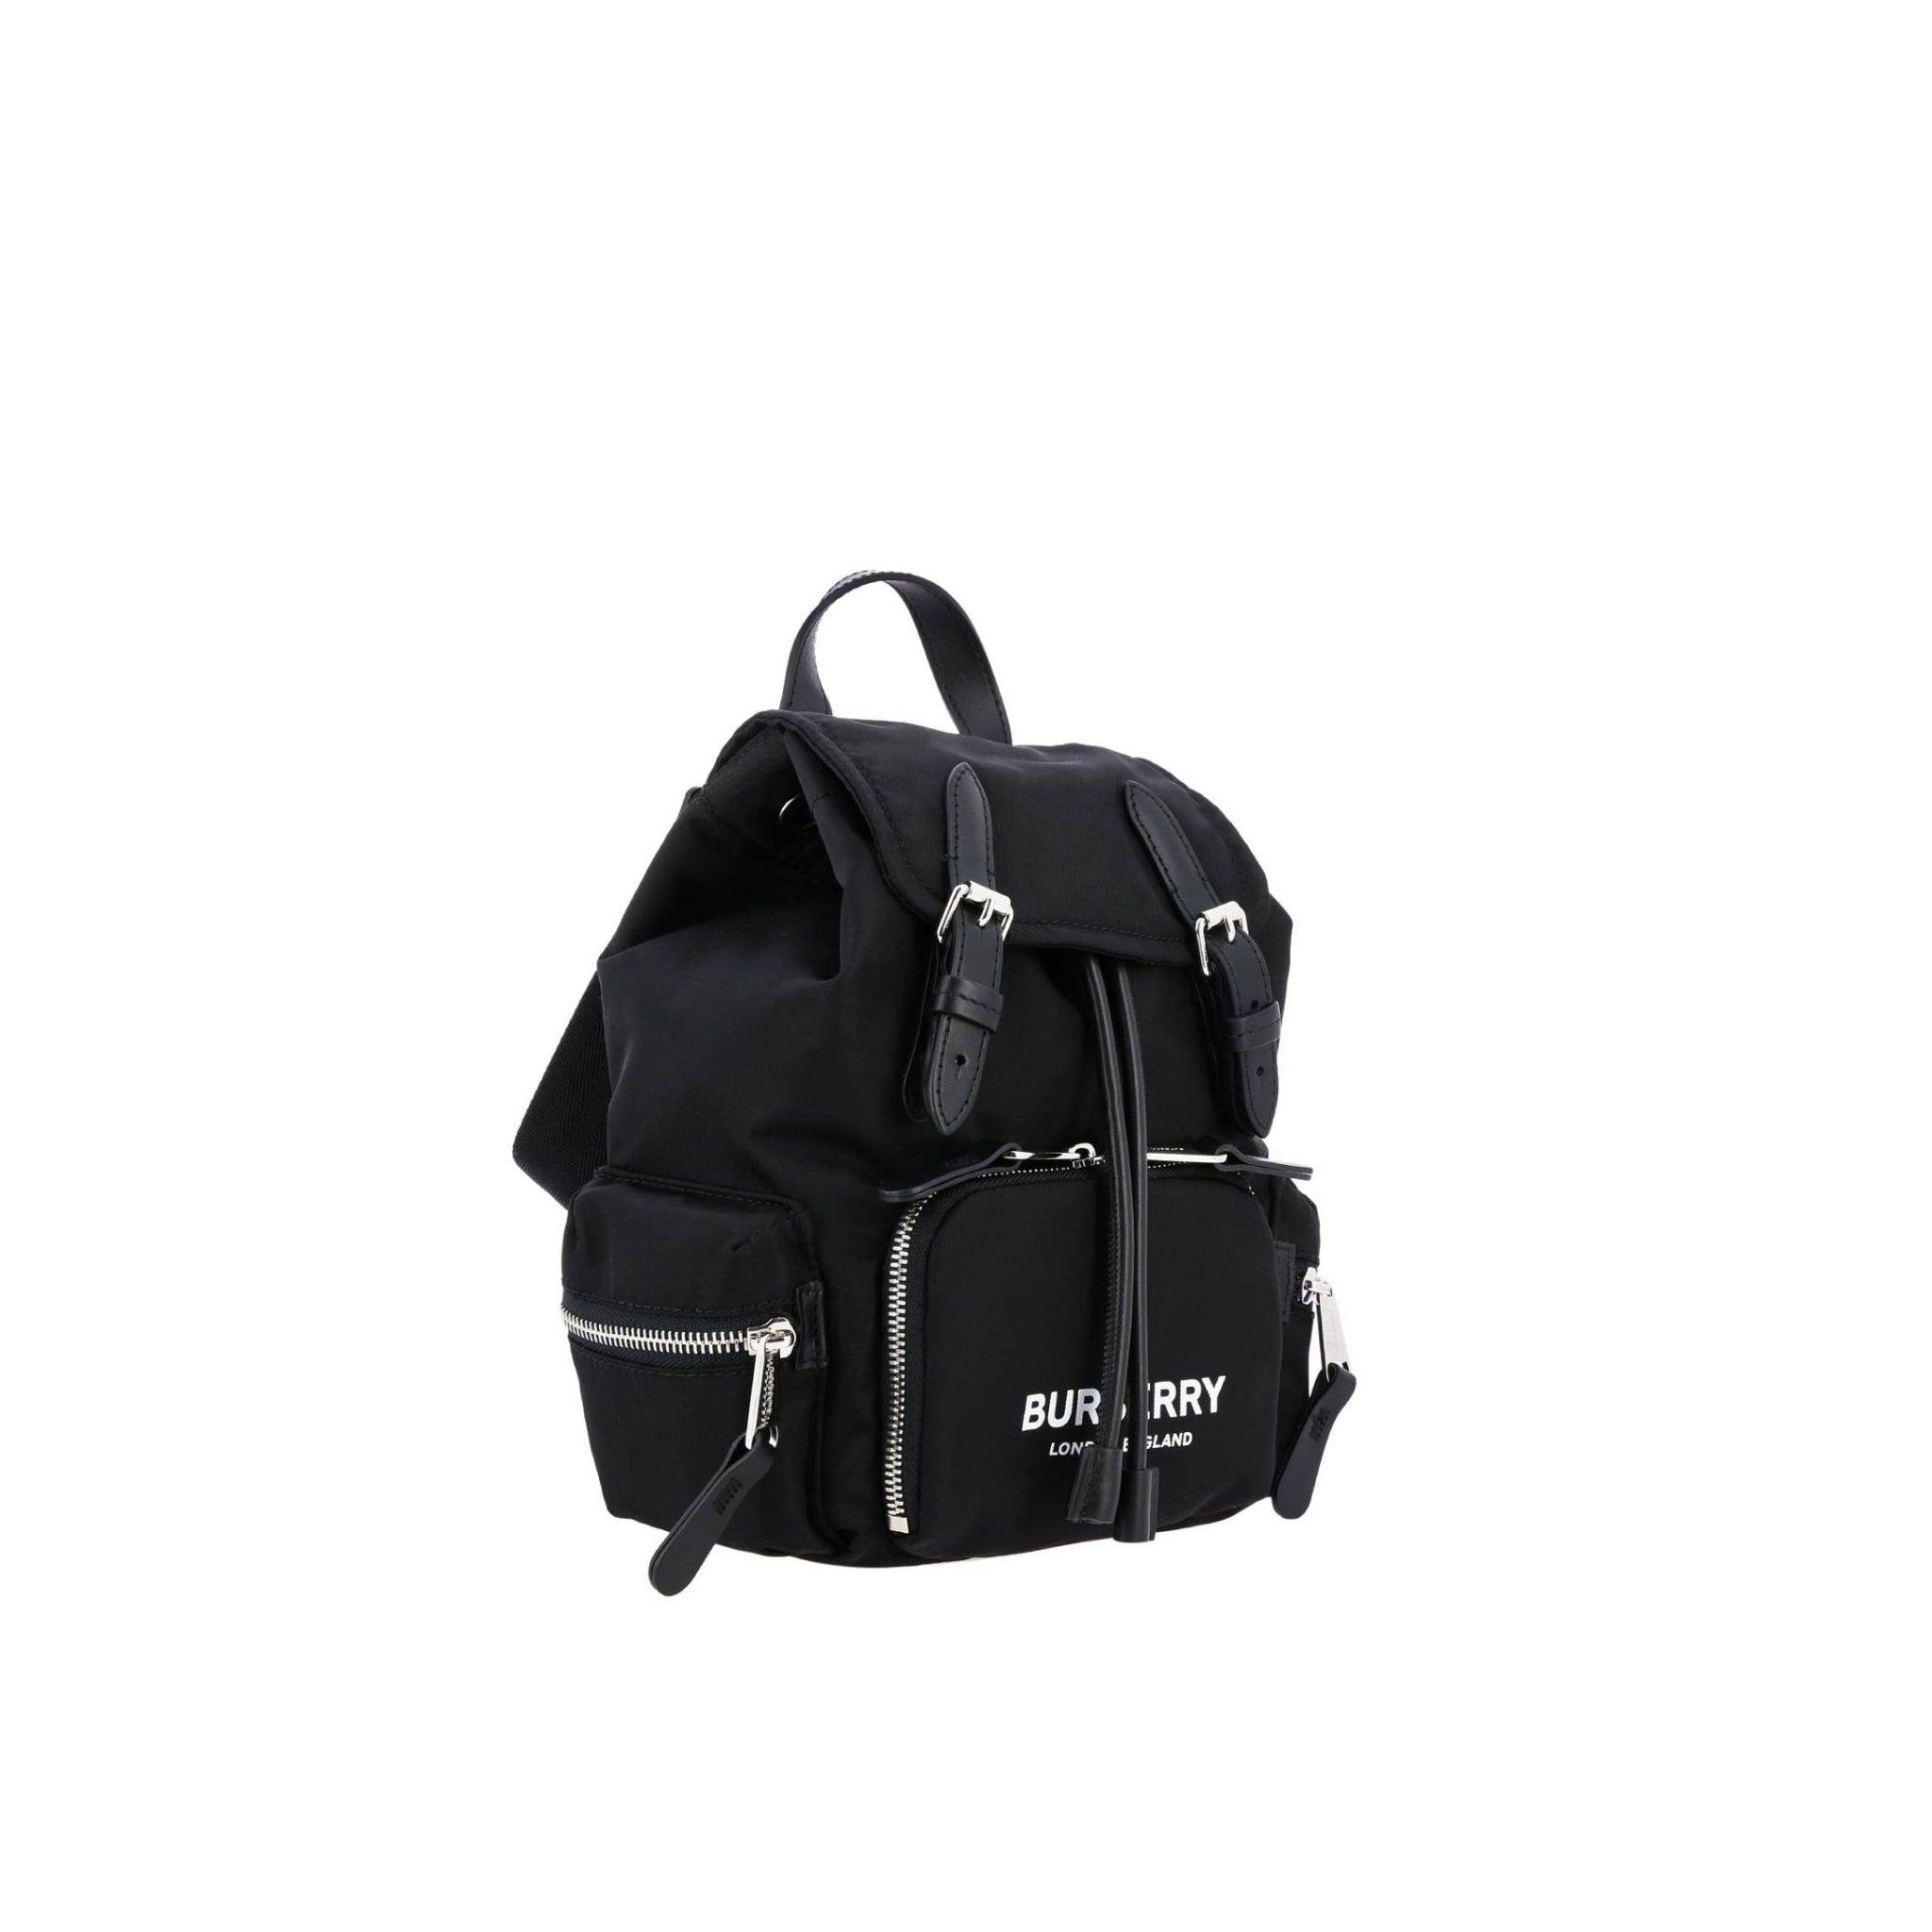 Burberry Synthetic Logo Mini Backpack in Black - Lyst